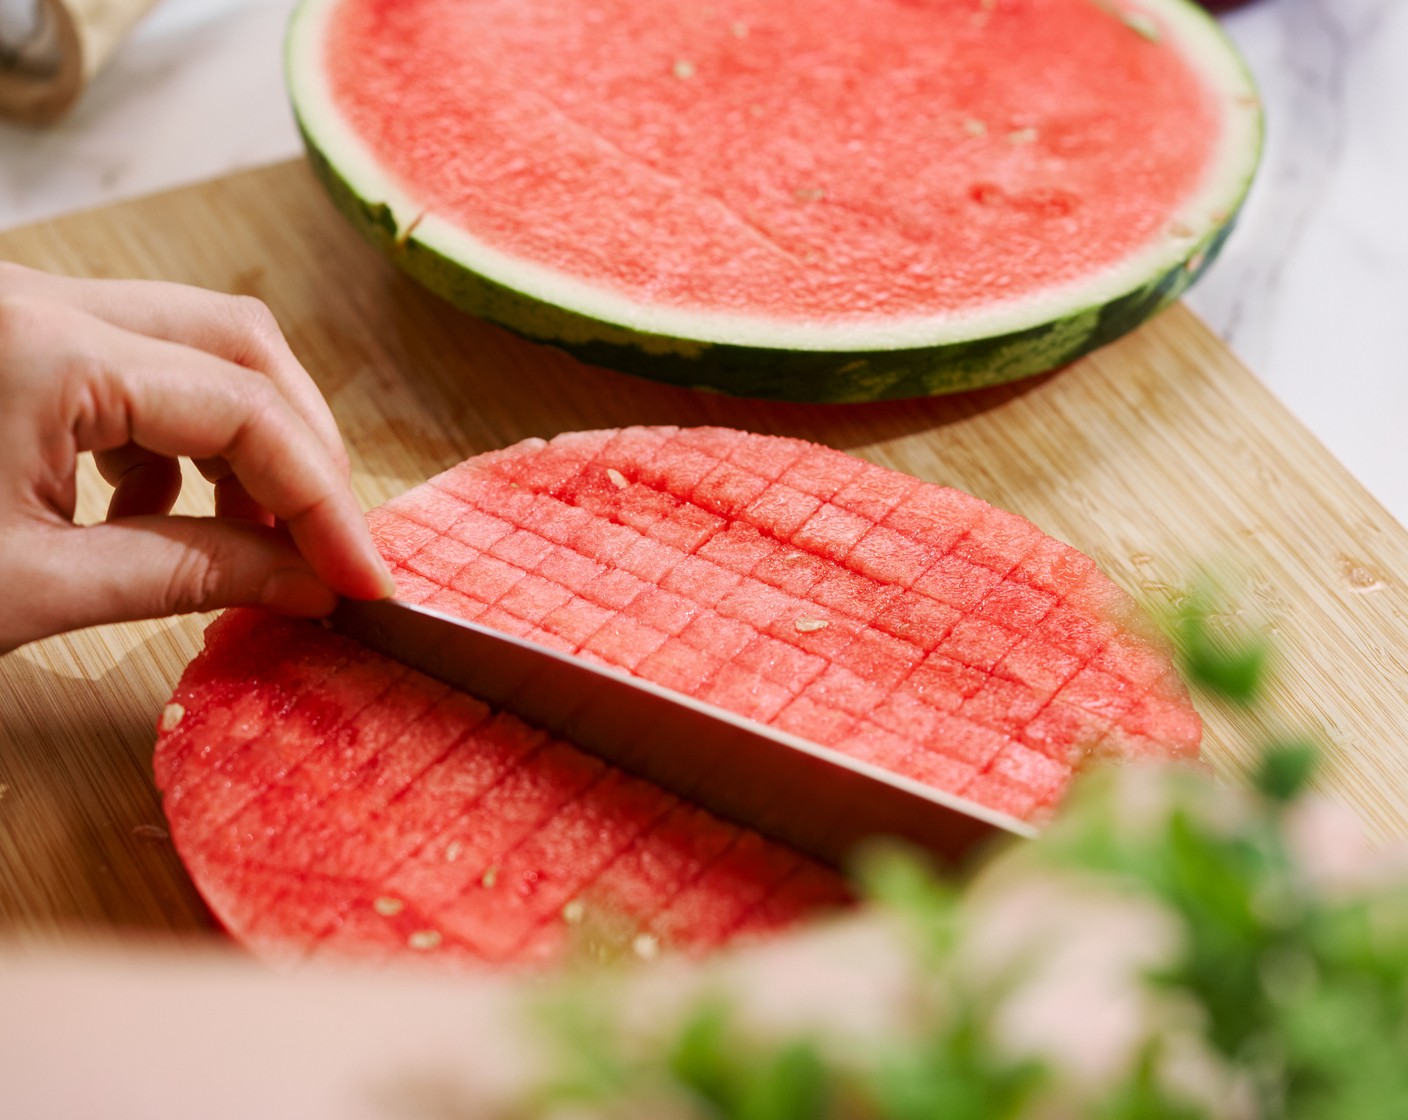 step 1 Cut Watermelons (6 cups) into small cubes depending on your preferred size. Make sure to deseed the watermelon. Set aside.